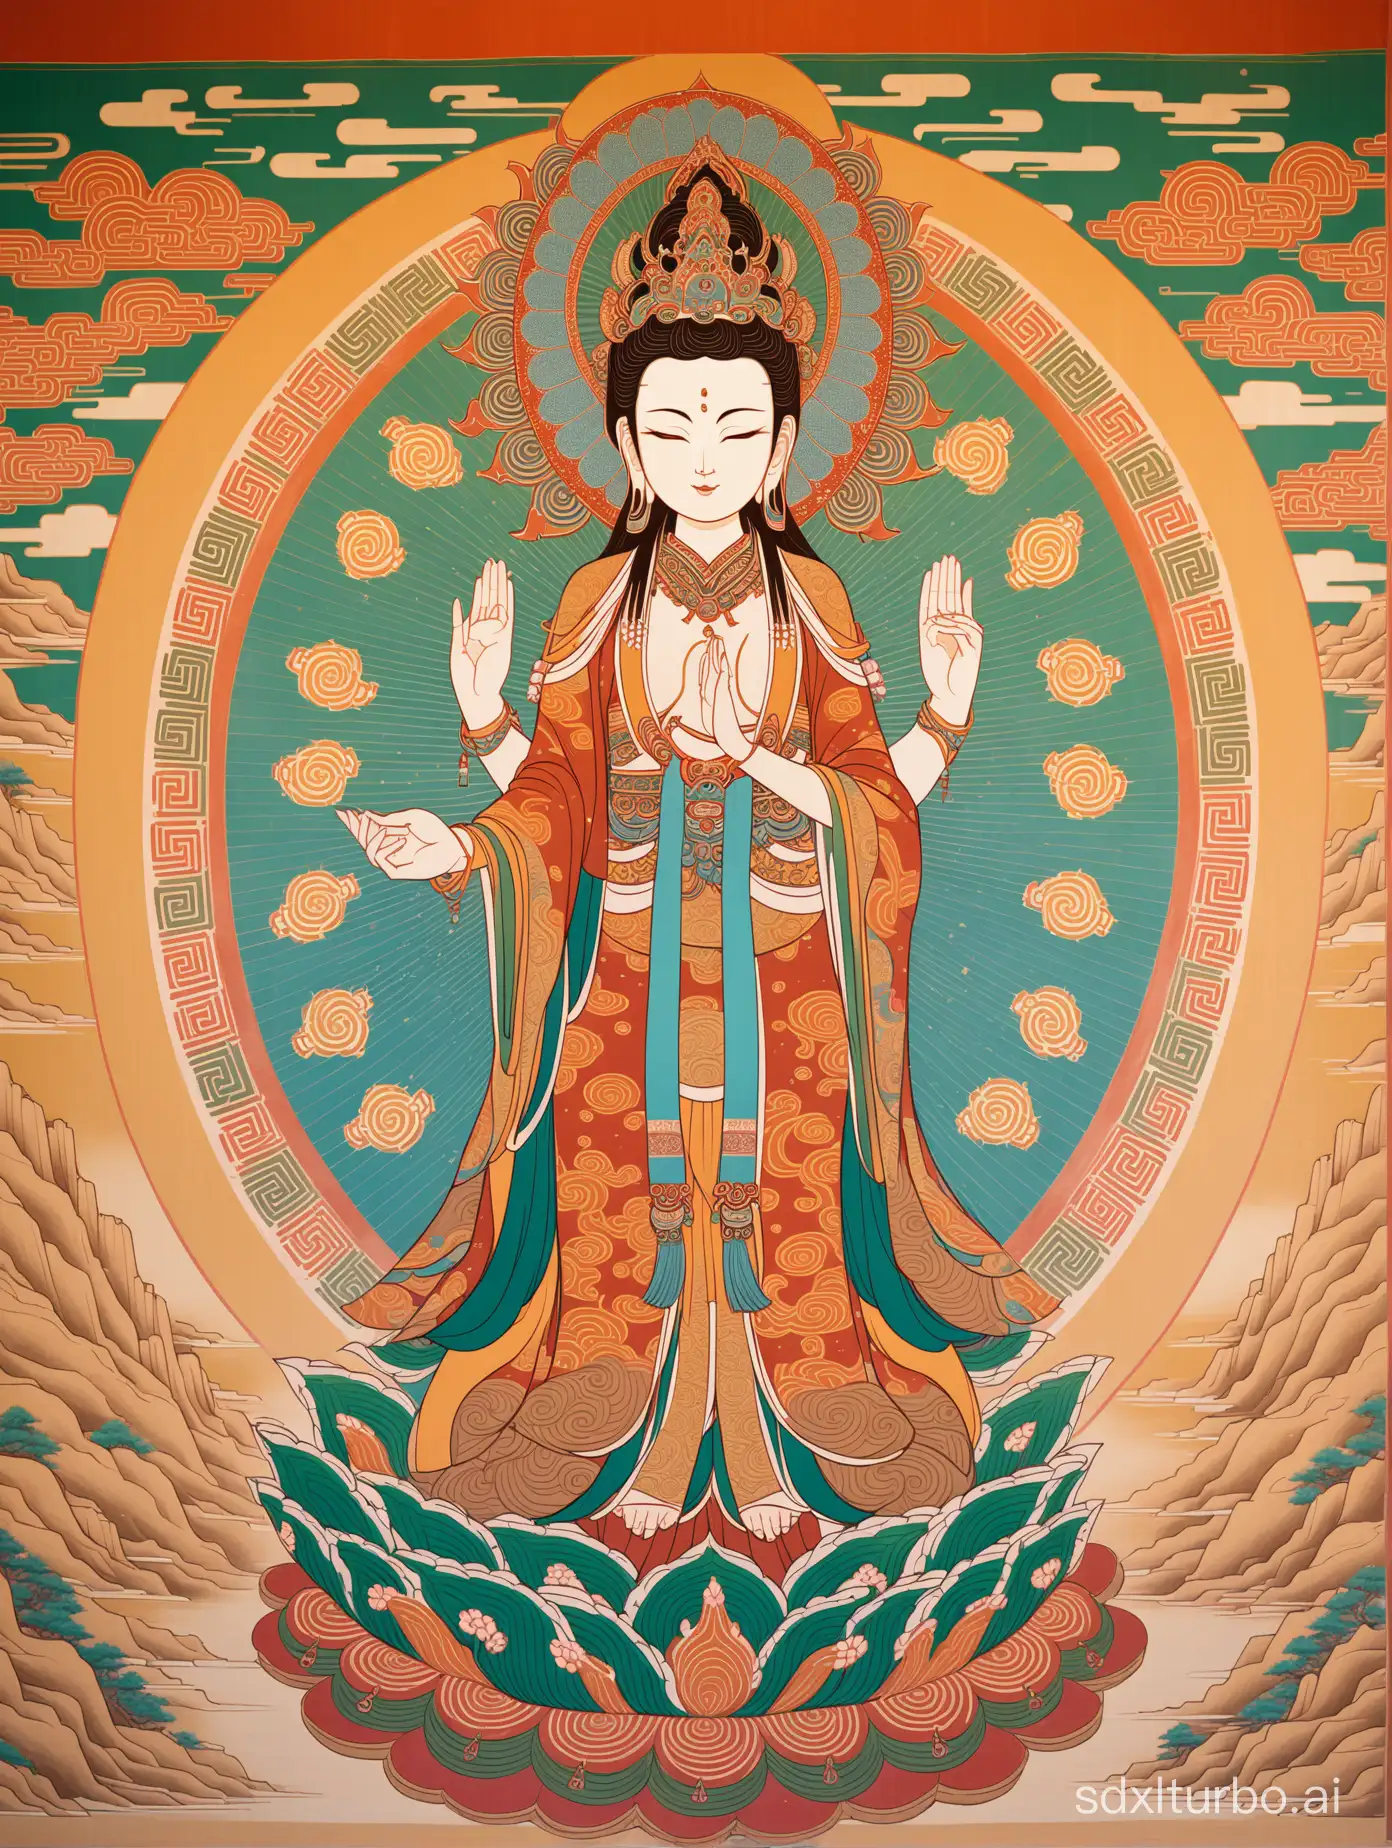 ThousandHand-Guanyin-Statue-in-Dunhuang-Mural-Style